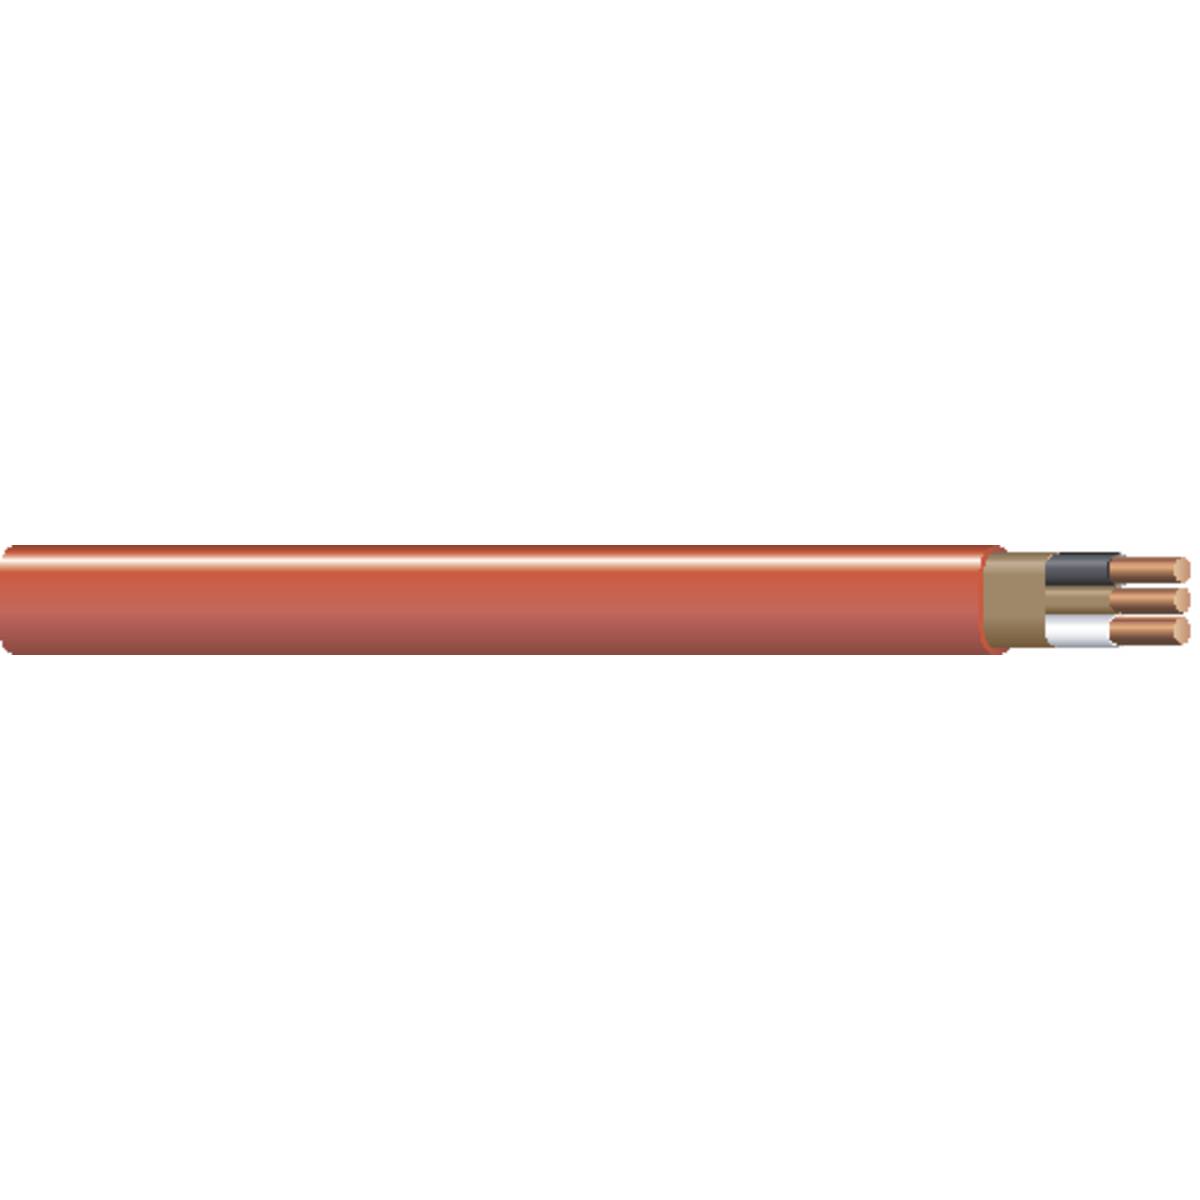 10/2 NM-B, Non-Mettallic, Sheathed Cable, Residential Indoor Wire, Equivalent to Romex